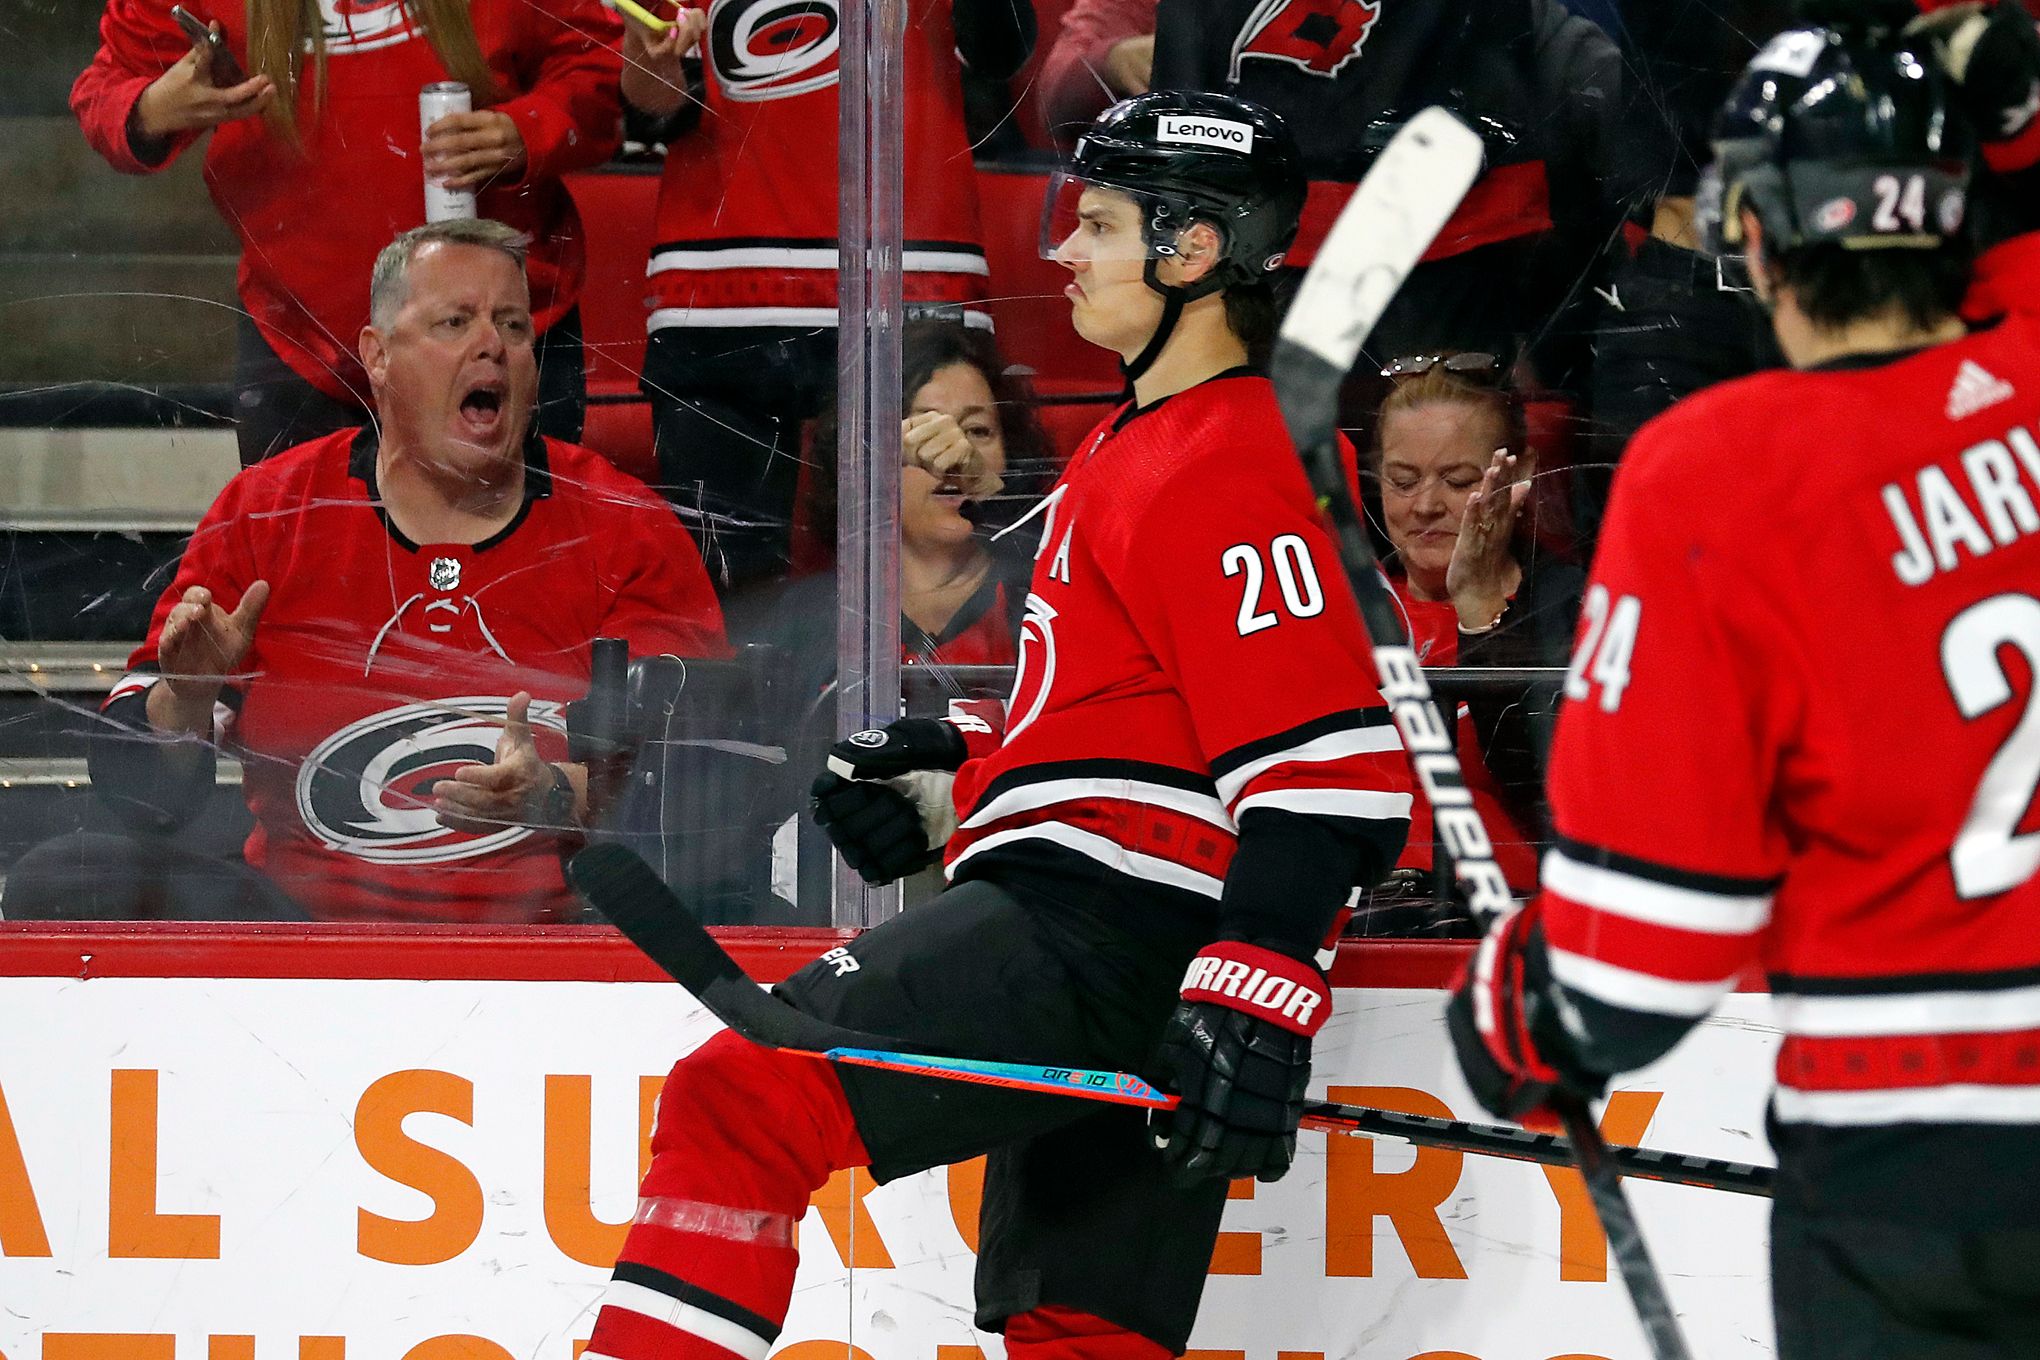 The longer the Hurricanes' road playoff losing streak gets, the